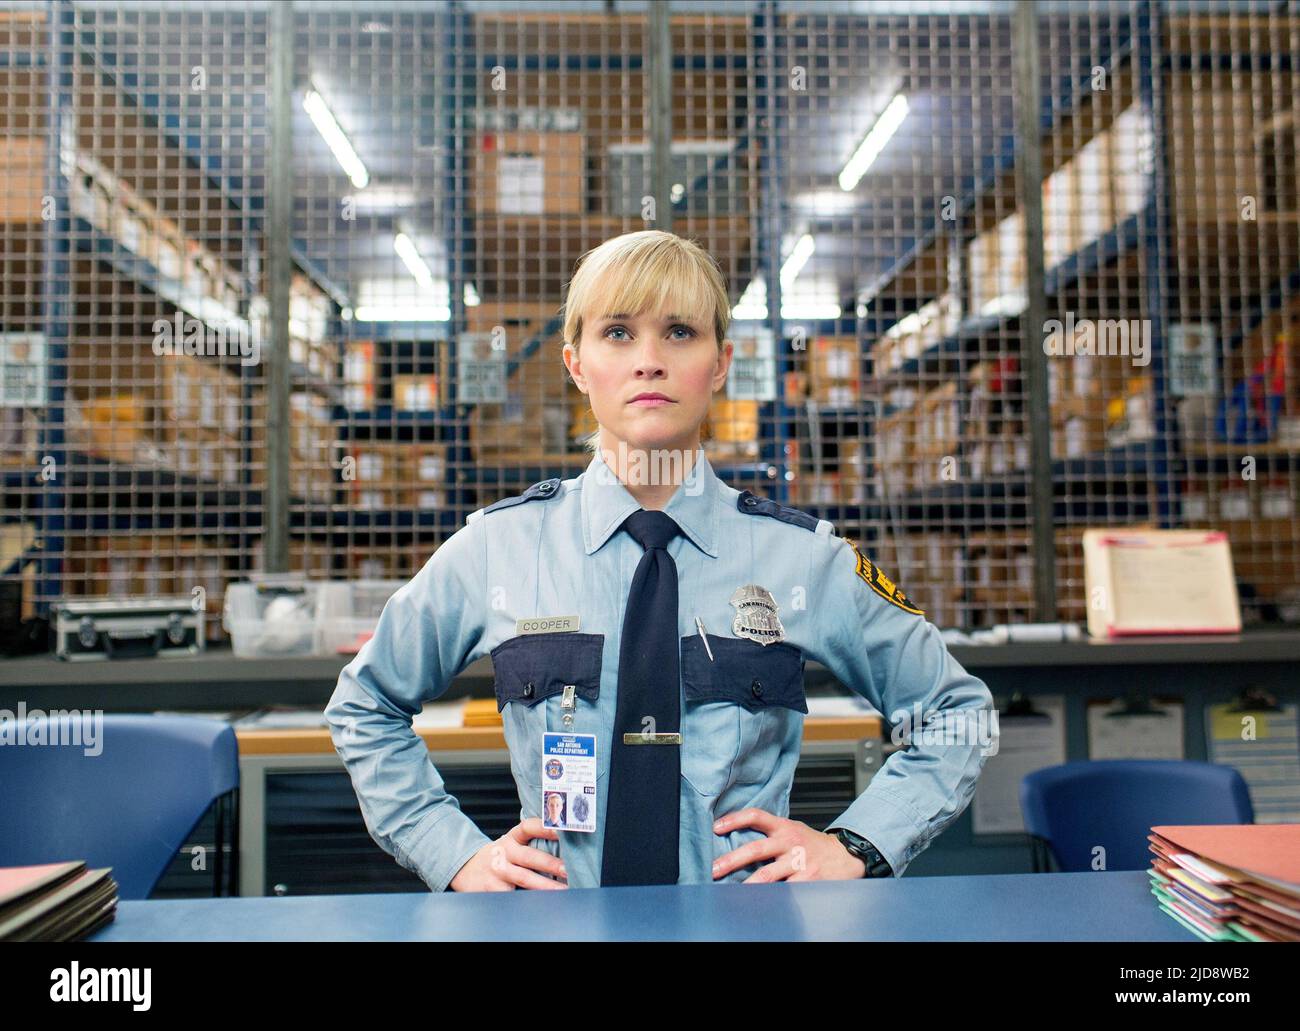 REESE WITHERSPOON, HOT PURSUIT, 2015, Banque D'Images